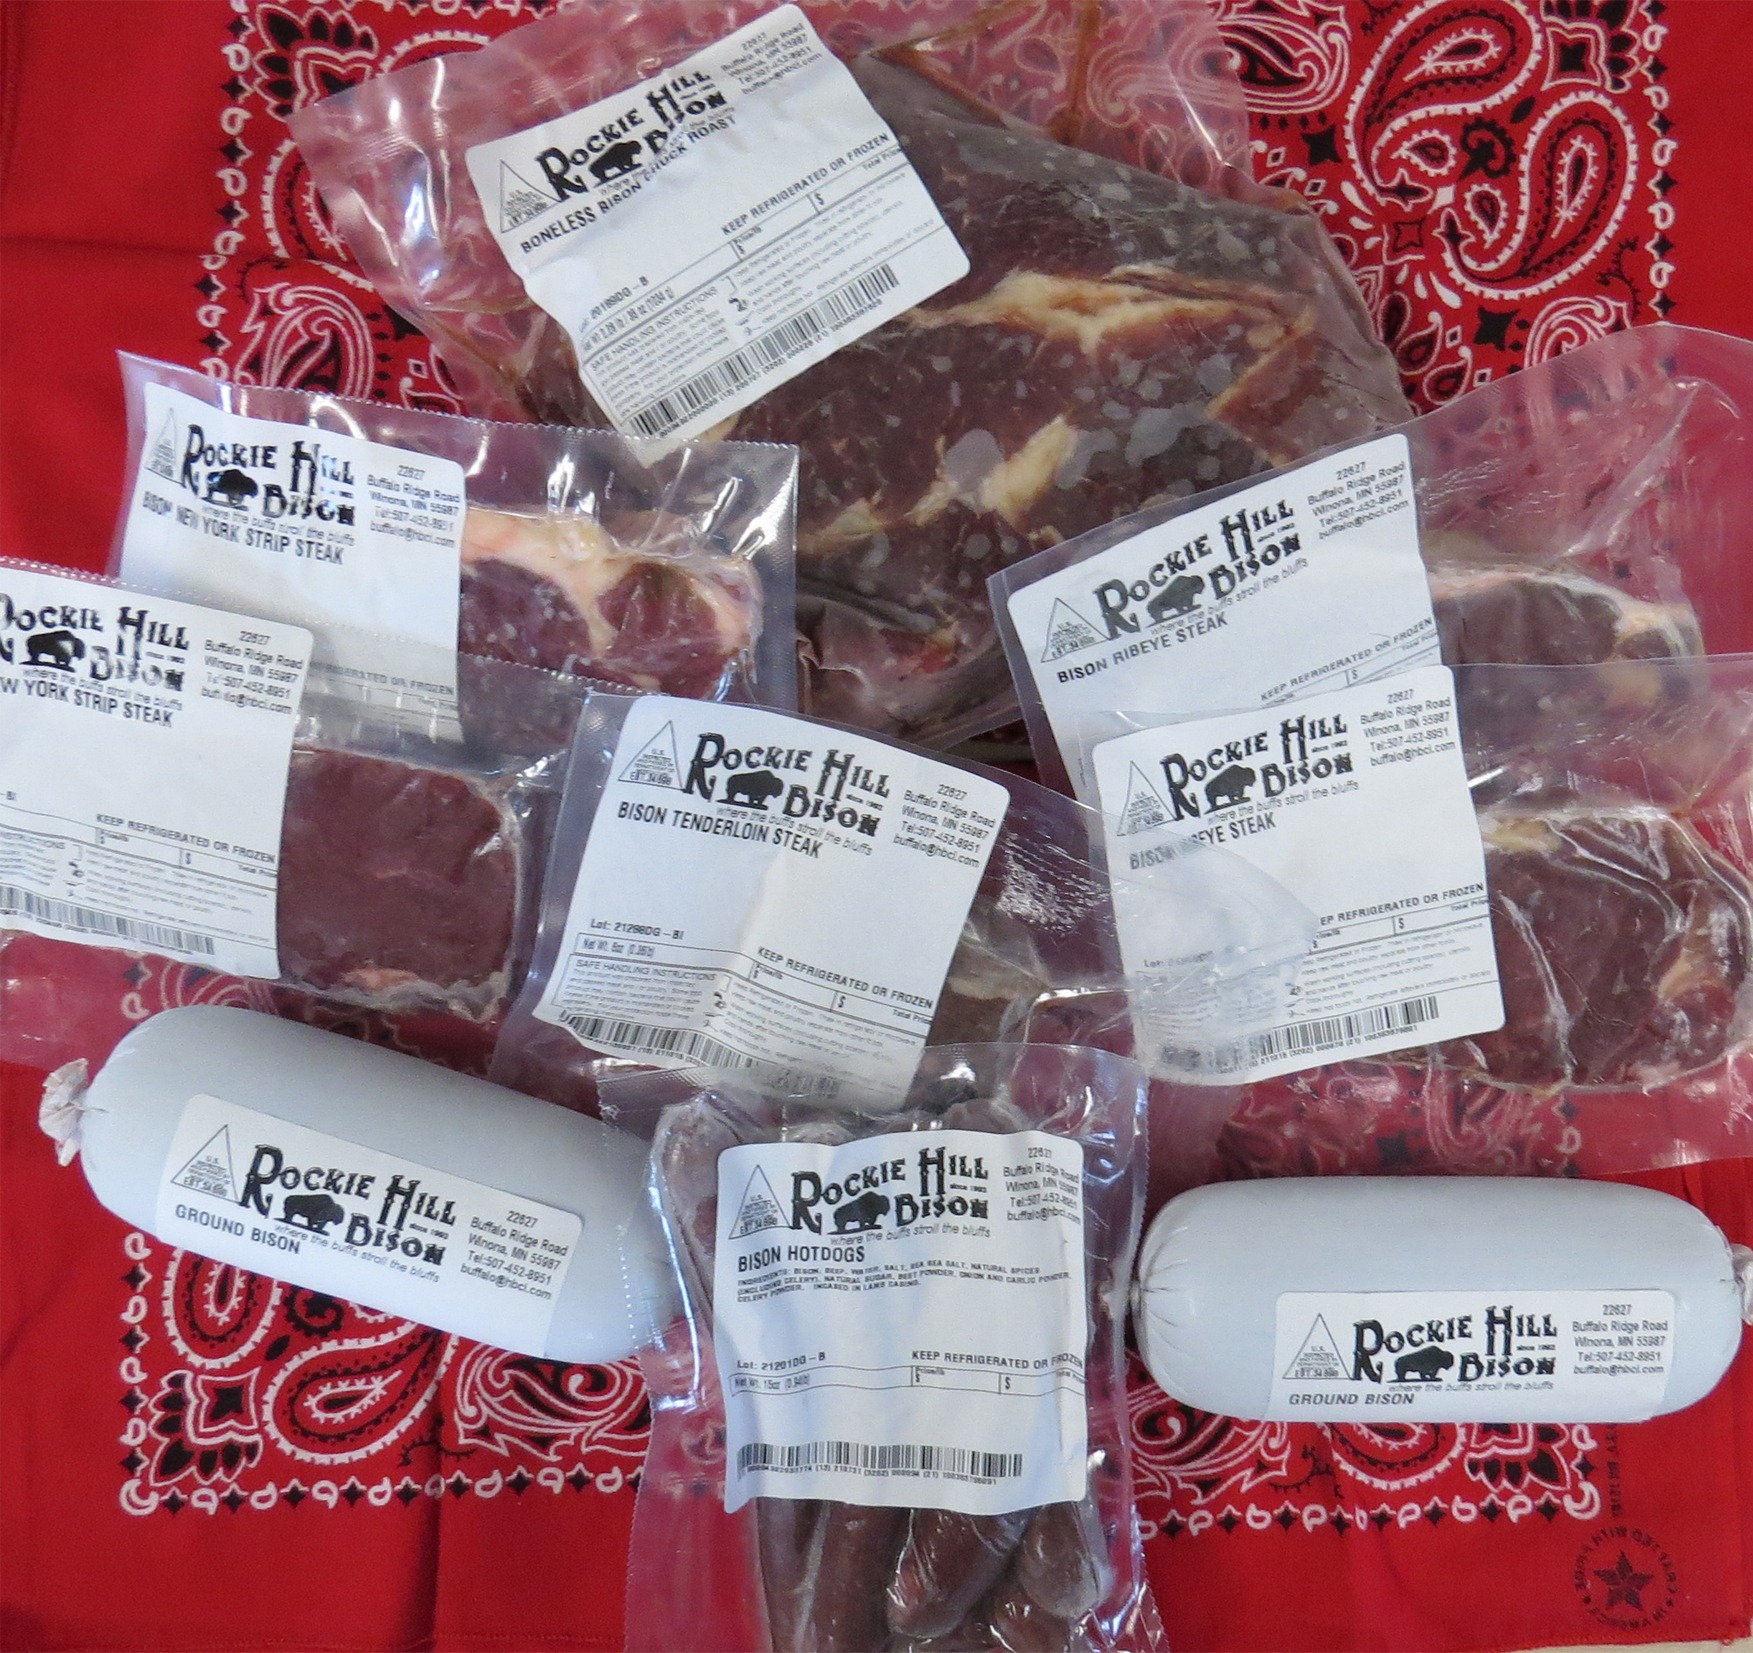 An assortment of frozen bison meat from Rockie Hill Bison.